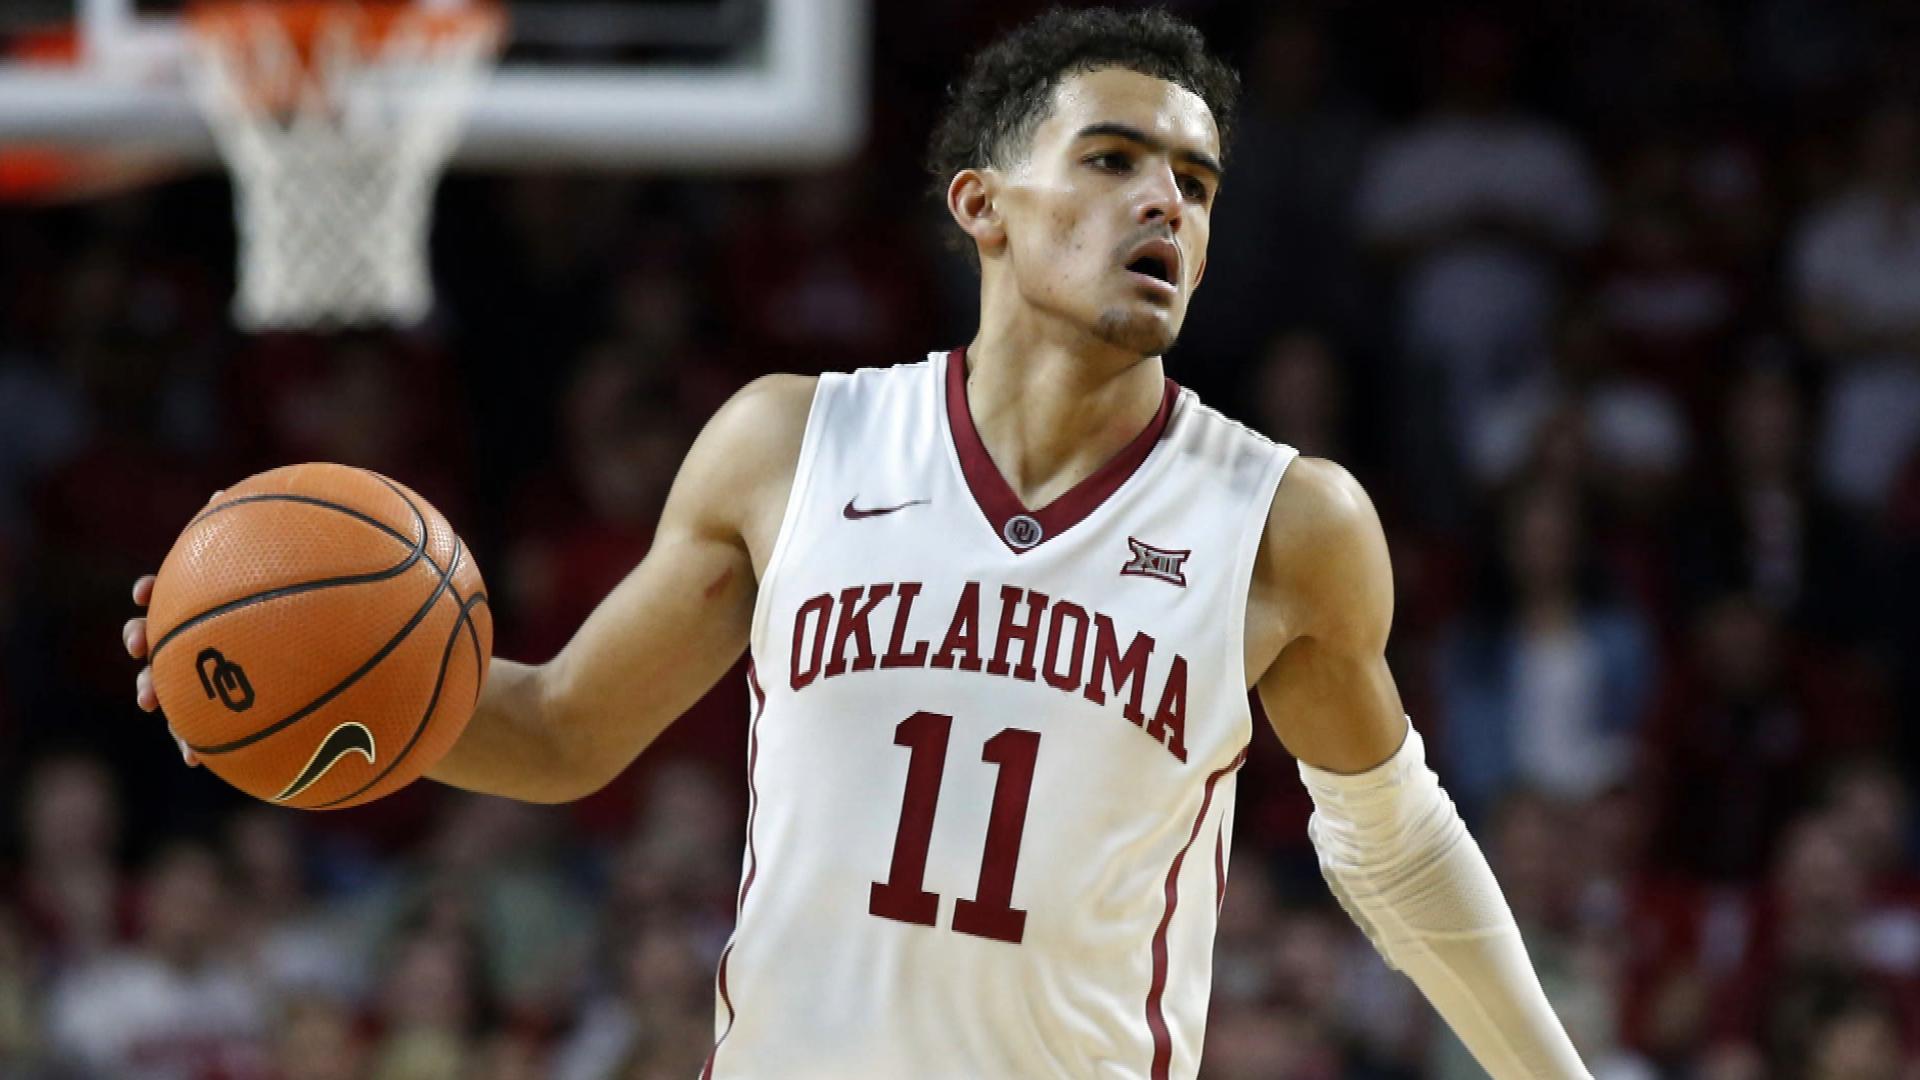 Charles Barkley: Trae Young should stay at Oklahoma to get stronger